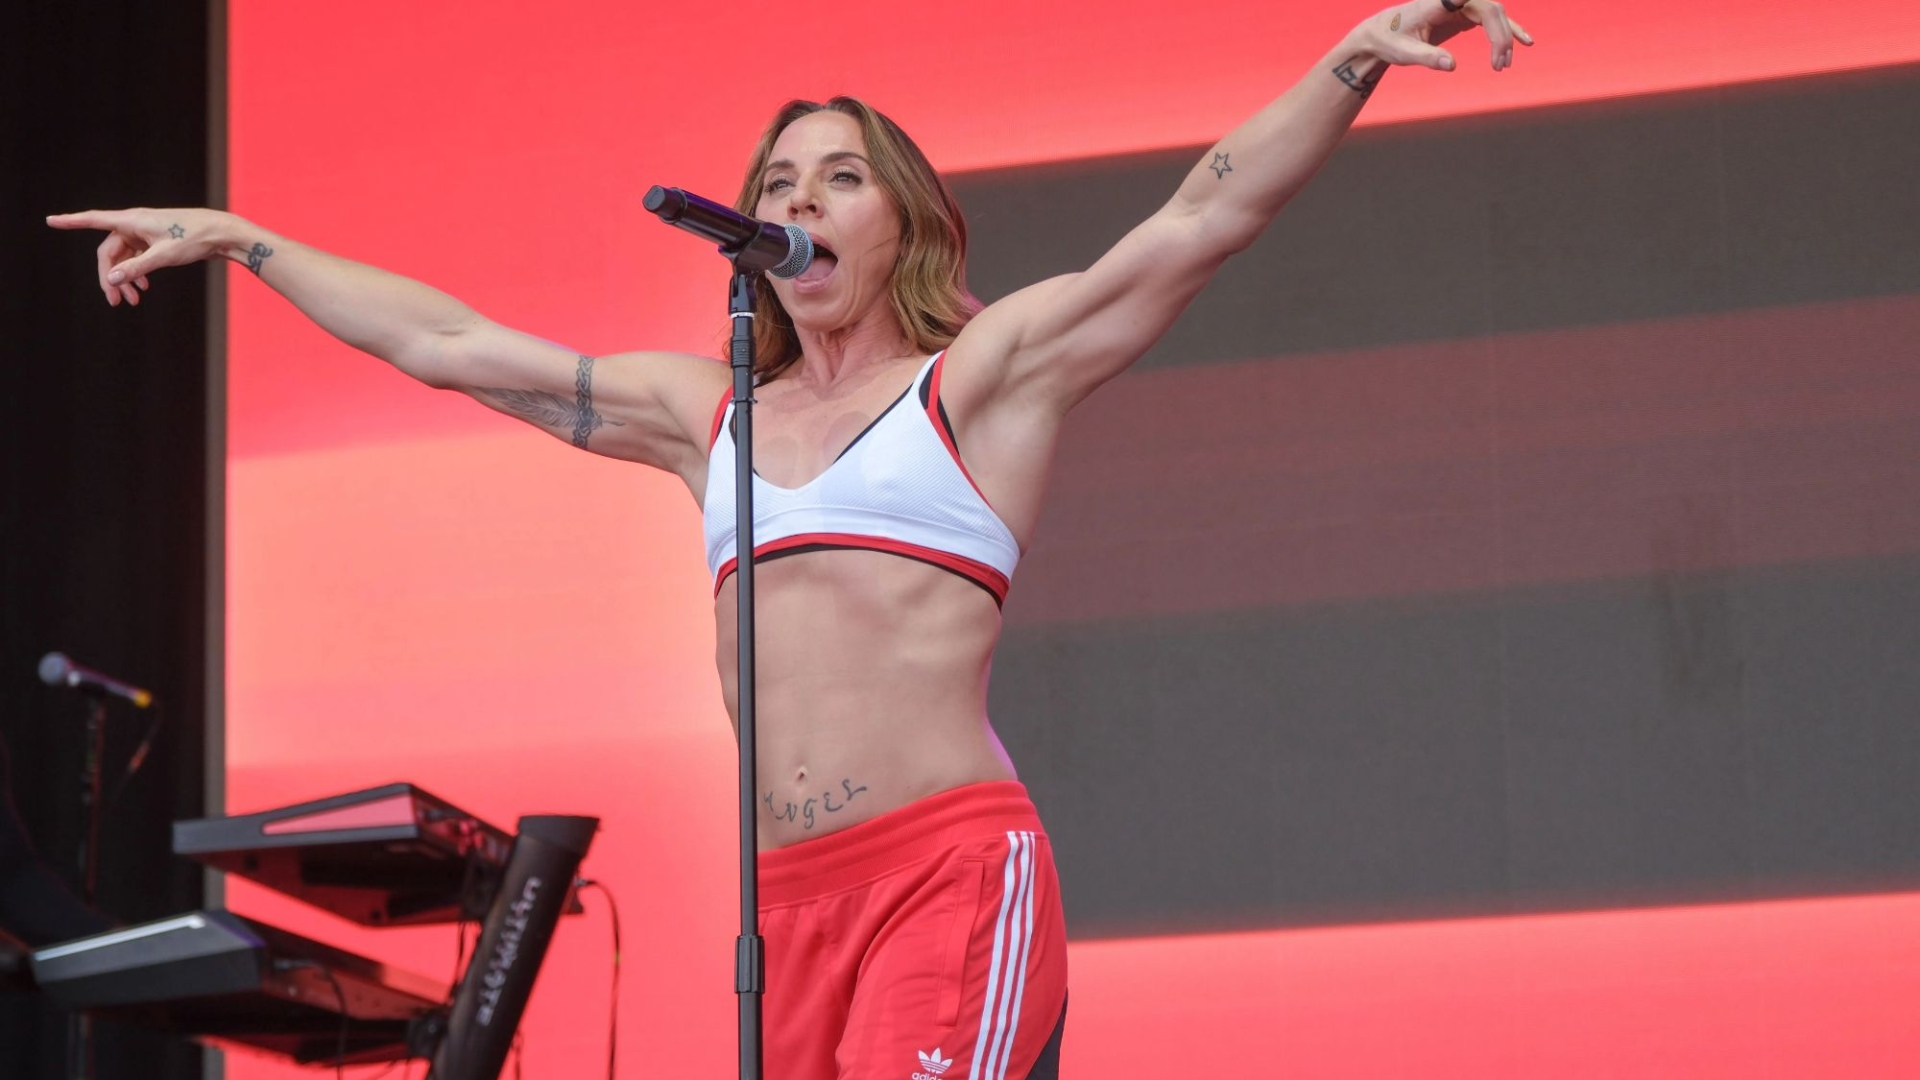 Spice Girl Mel C performs with her amazing ripped abs while wearing a sports bra